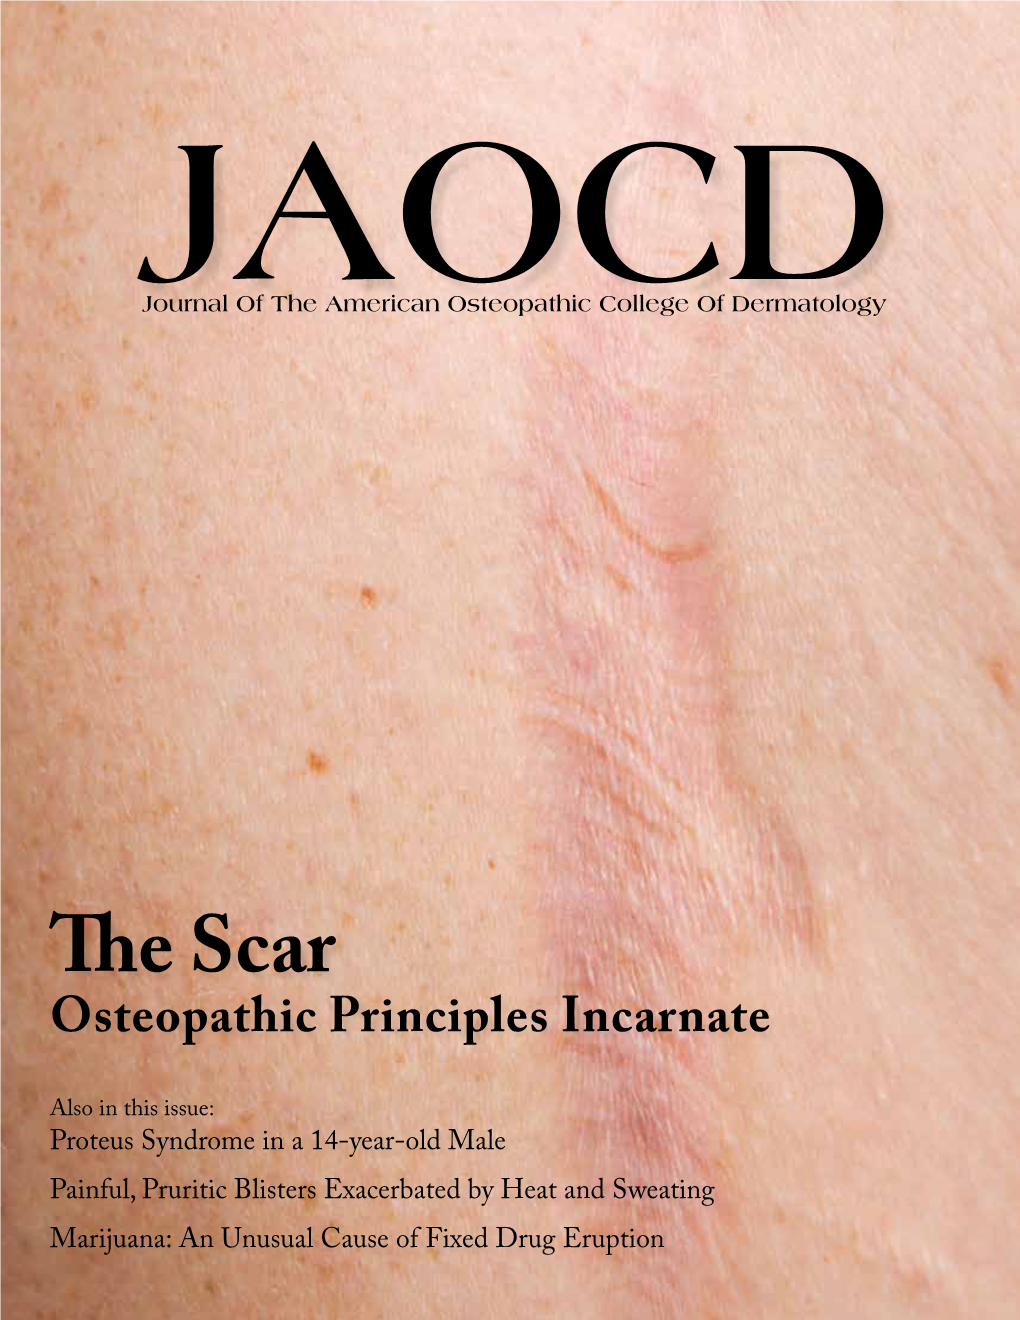 The Scar Osteopathic Principles Incarnate